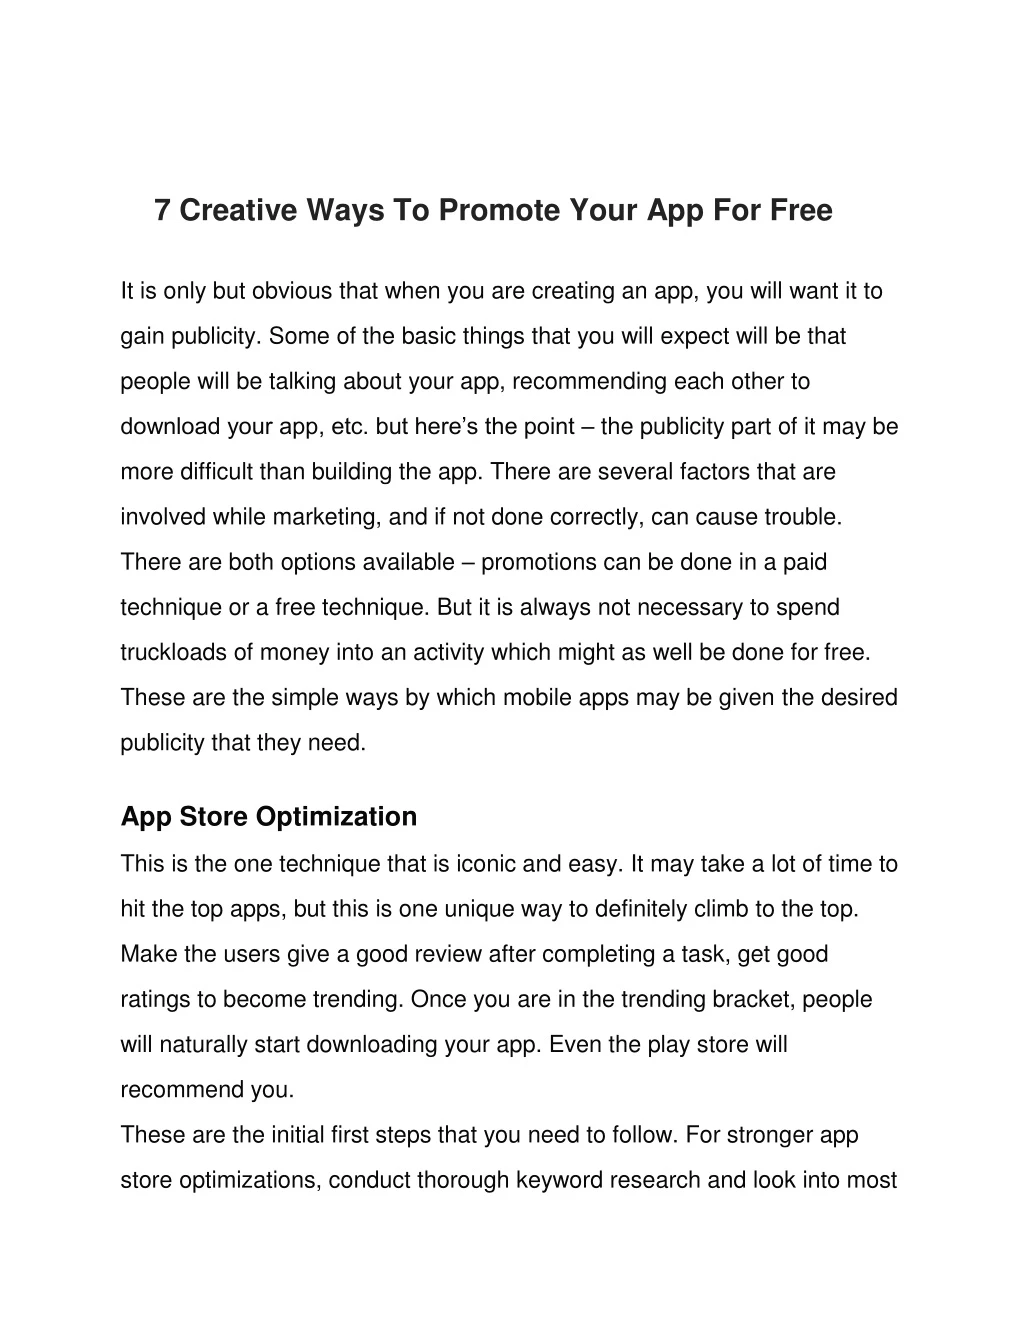 7 creative ways to promote your app for free